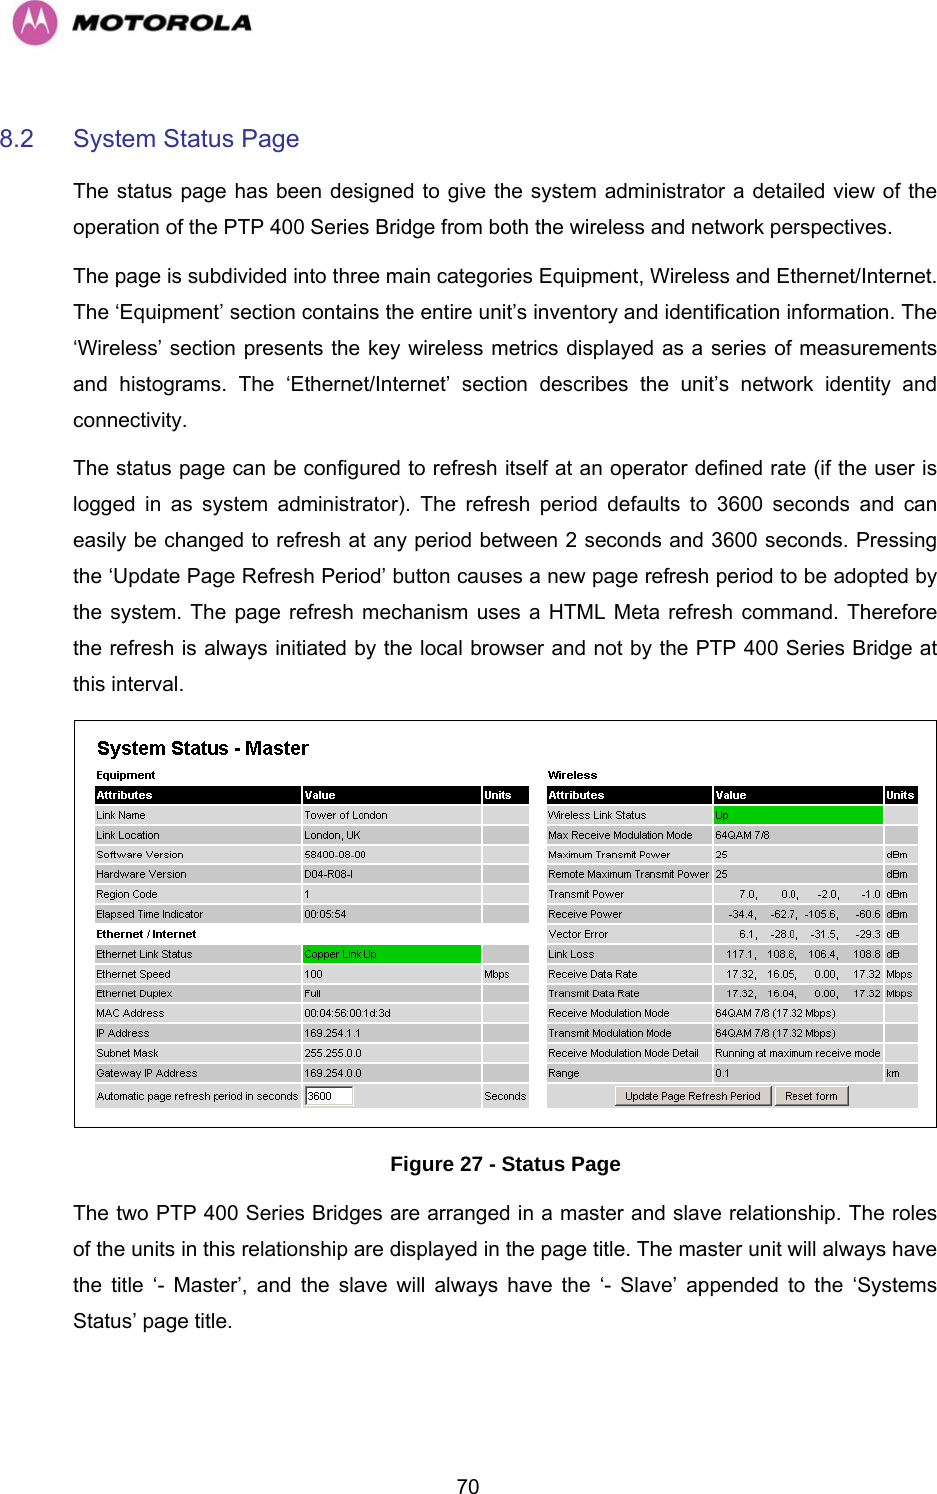   708.2  System Status Page  The status page has been designed to give the system administrator a detailed view of the operation of the PTP 400 Series Bridge from both the wireless and network perspectives.  The page is subdivided into three main categories Equipment, Wireless and Ethernet/Internet. The ‘Equipment’ section contains the entire unit’s inventory and identification information. The ‘Wireless’ section presents the key wireless metrics displayed as a series of measurements and histograms. The ‘Ethernet/Internet’ section describes the unit’s network identity and connectivity. The status page can be configured to refresh itself at an operator defined rate (if the user is logged in as system administrator). The refresh period defaults to 3600 seconds and can easily be changed to refresh at any period between 2 seconds and 3600 seconds. Pressing the ‘Update Page Refresh Period’ button causes a new page refresh period to be adopted by the system. The page refresh mechanism uses a HTML Meta refresh command. Therefore the refresh is always initiated by the local browser and not by the PTP 400 Series Bridge at this interval.  Figure 27 - Status Page The two PTP 400 Series Bridges are arranged in a master and slave relationship. The roles of the units in this relationship are displayed in the page title. The master unit will always have the title ‘- Master’, and the slave will always have the ‘- Slave’ appended to the ‘Systems Status’ page title. 